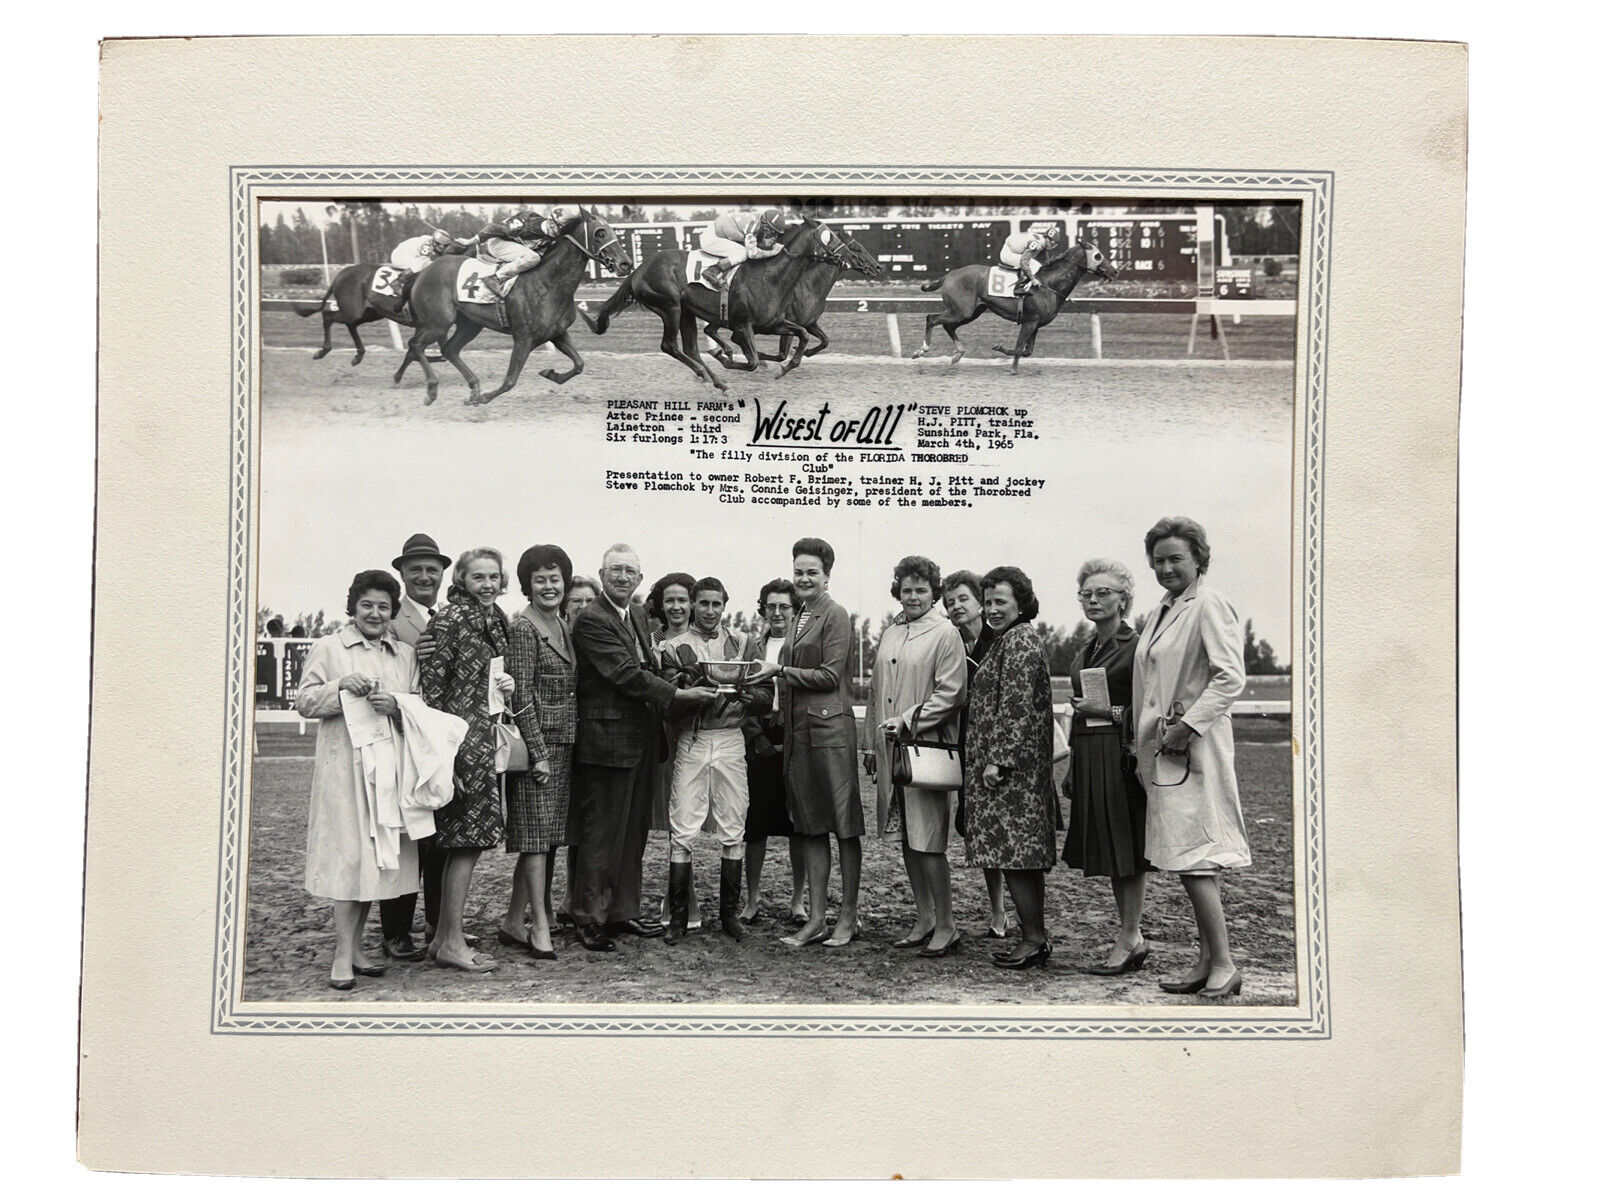 Rare Turfotos Horse Racing 1965 “Wisest of All” 11”x14” Mounted Photograph B&W